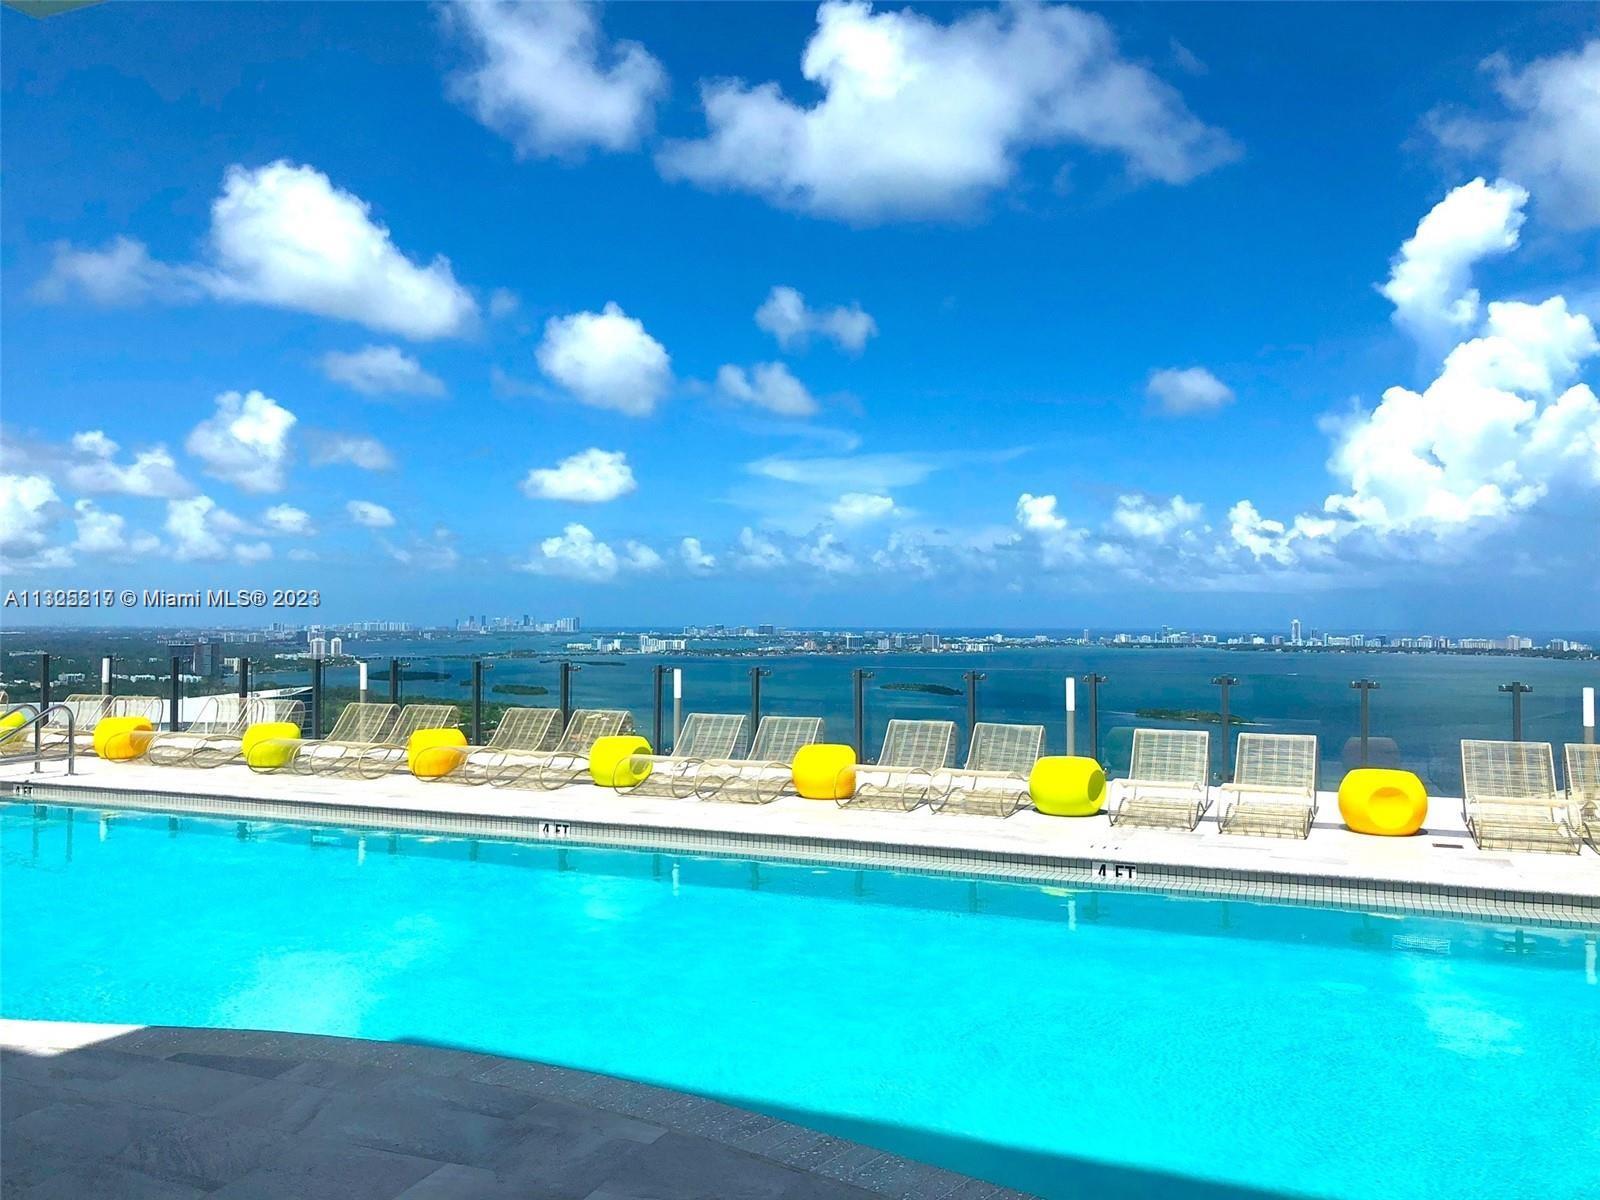 Panoramic Bay views from this 1 bedroom + den and 1.5 bath in Paraiso Bayviews. Ceramic floors, custom italian style cabinets, Bosch appliances, large balcony. Interiors by Karim Rashid, contemporary design, revel in the beauty of horizons to horizon Biscayne bay and Atlantic Ocean views. building offers club room, billiard room, media/screening room, state of the art fitness center, spa with sauna, and AMAZING ROOF TOP POOL with spectacular Biscayne bay and MIAMI 360 views. Rental terms of 1-6 months, please text agent for availability. Photos of furniture will be posted after tenant vacates. Pets welcome but approved at owners discretion.